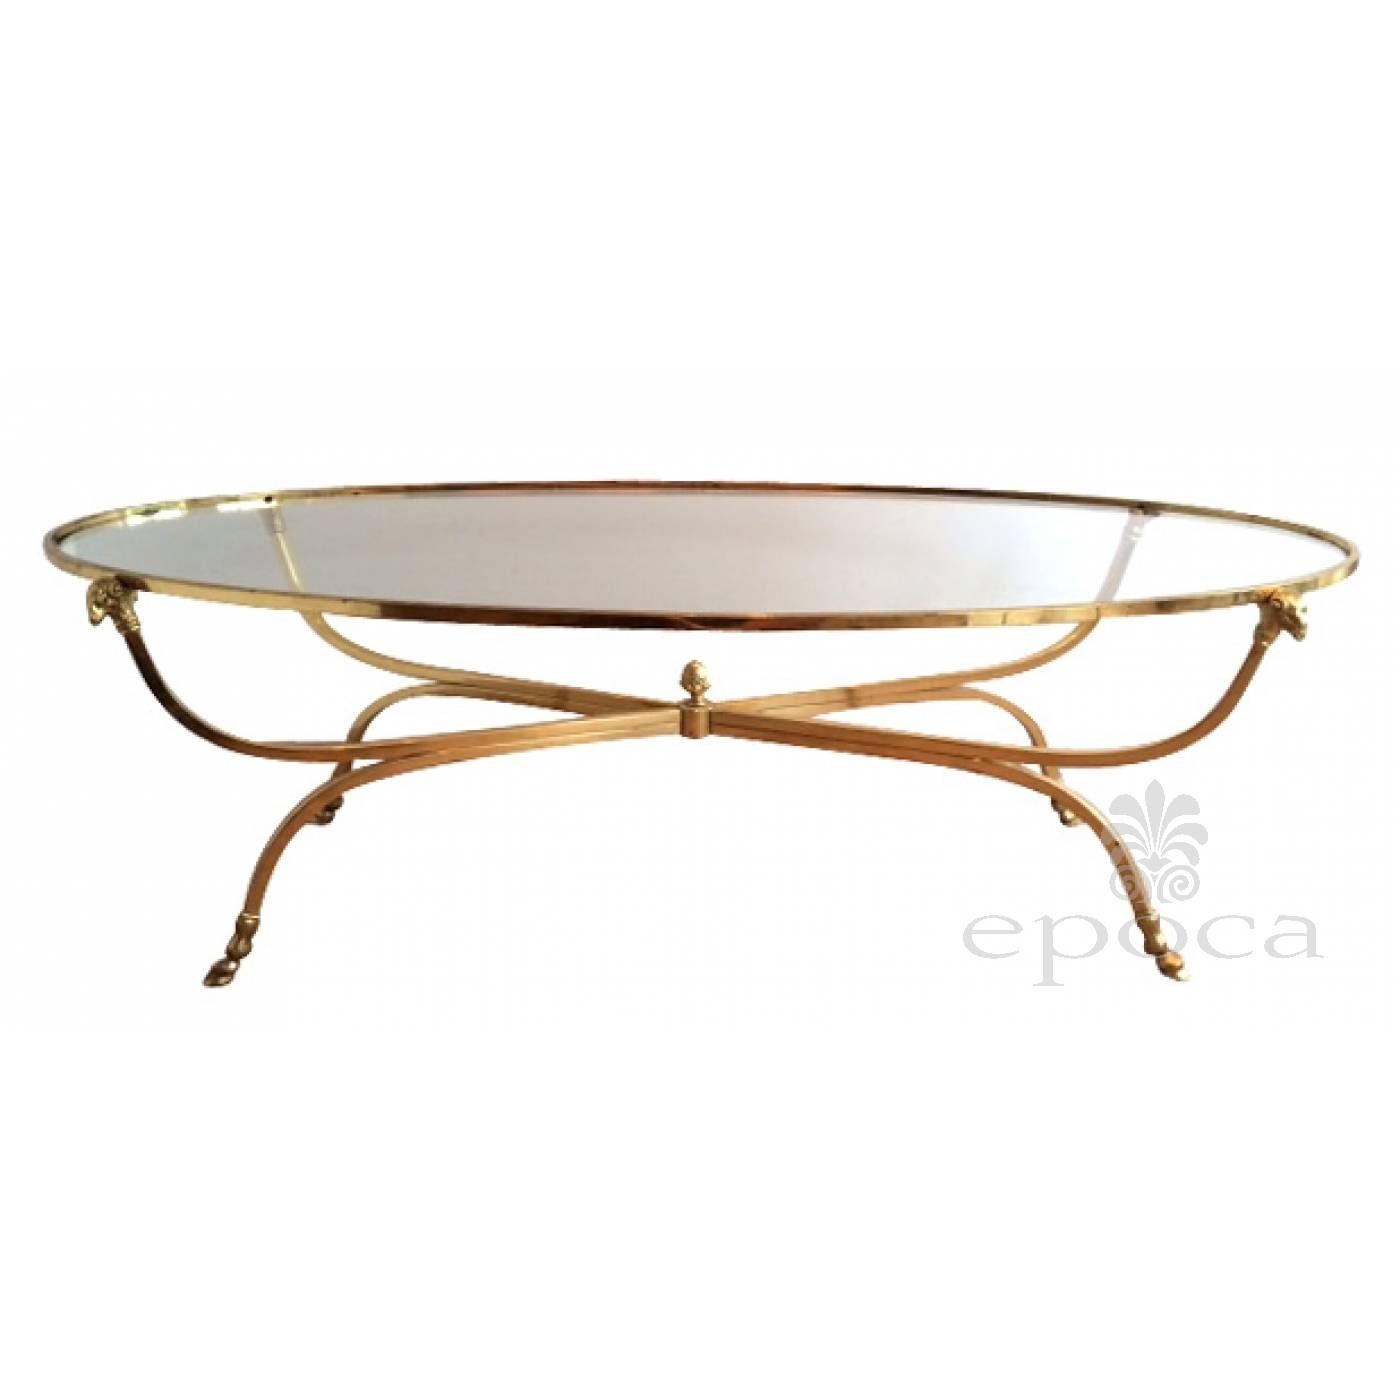 Antique French Glass Top Coffee Tables | Coffee Tables Decoration Throughout Antique Glass Coffee Tables (View 8 of 30)